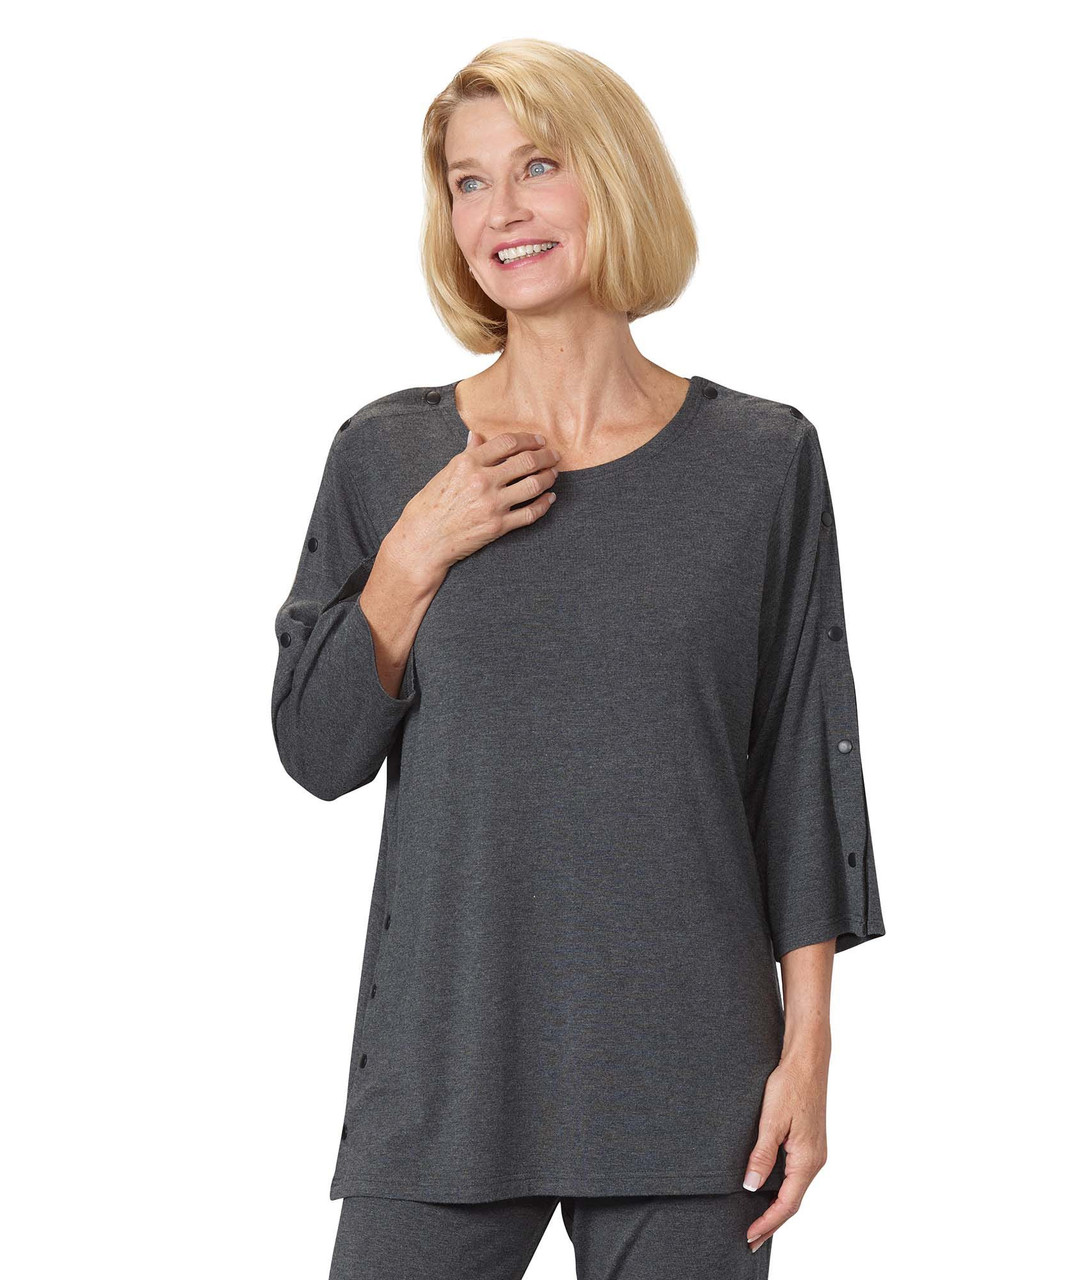 Silverts SV61000 Womens Post-Surgical Top With Snaps Heather Gray, Size=2XL, SV61000-SV1456-2XL